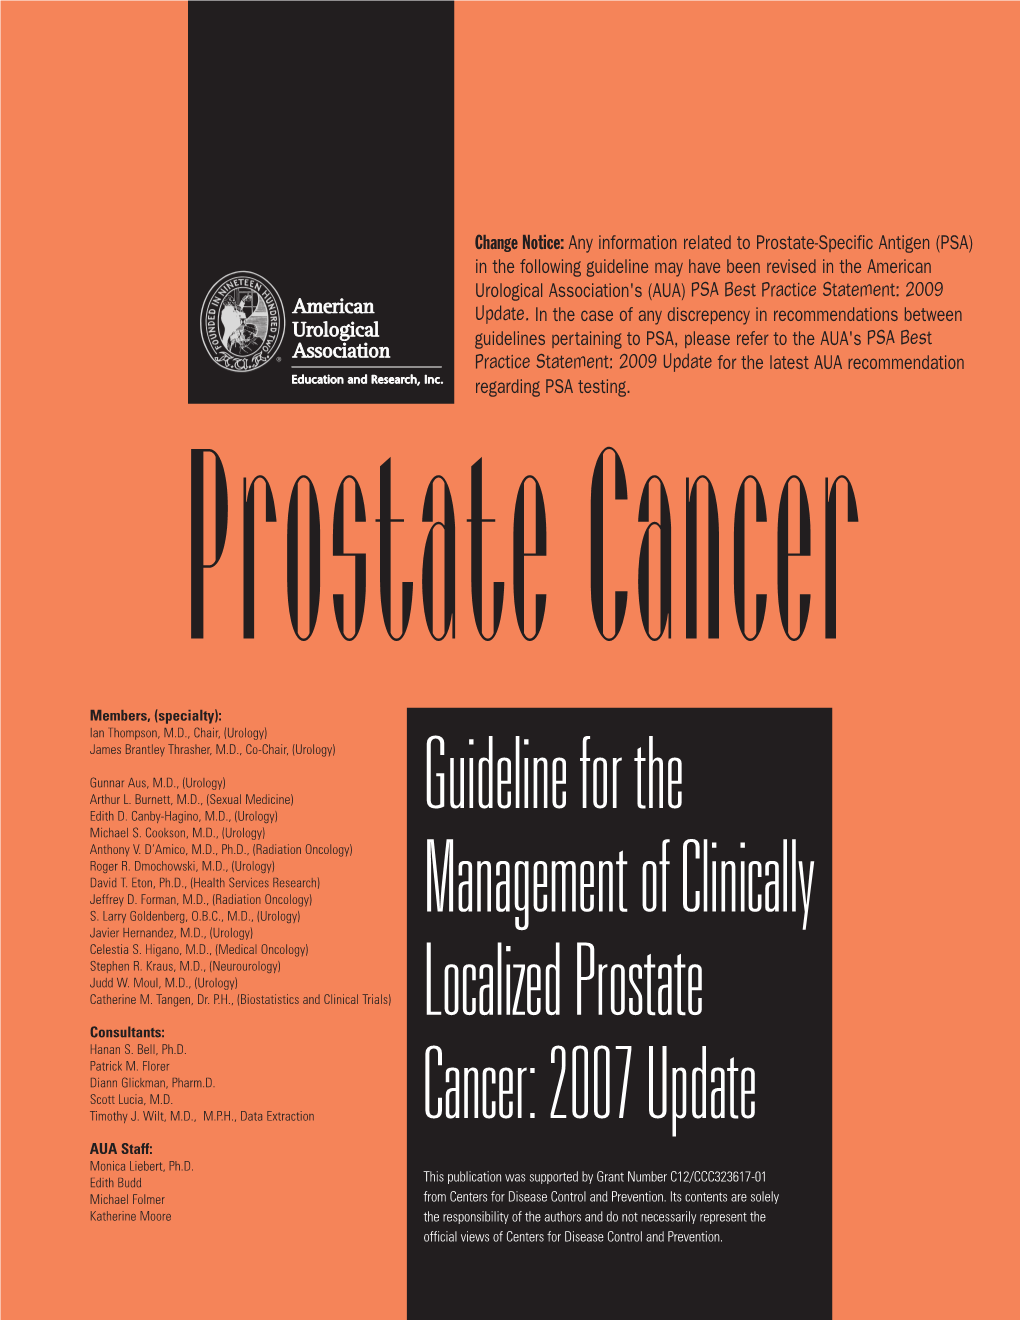 Guideline for the Management of Clinically Localized Prostate Cancer: 2007 Update